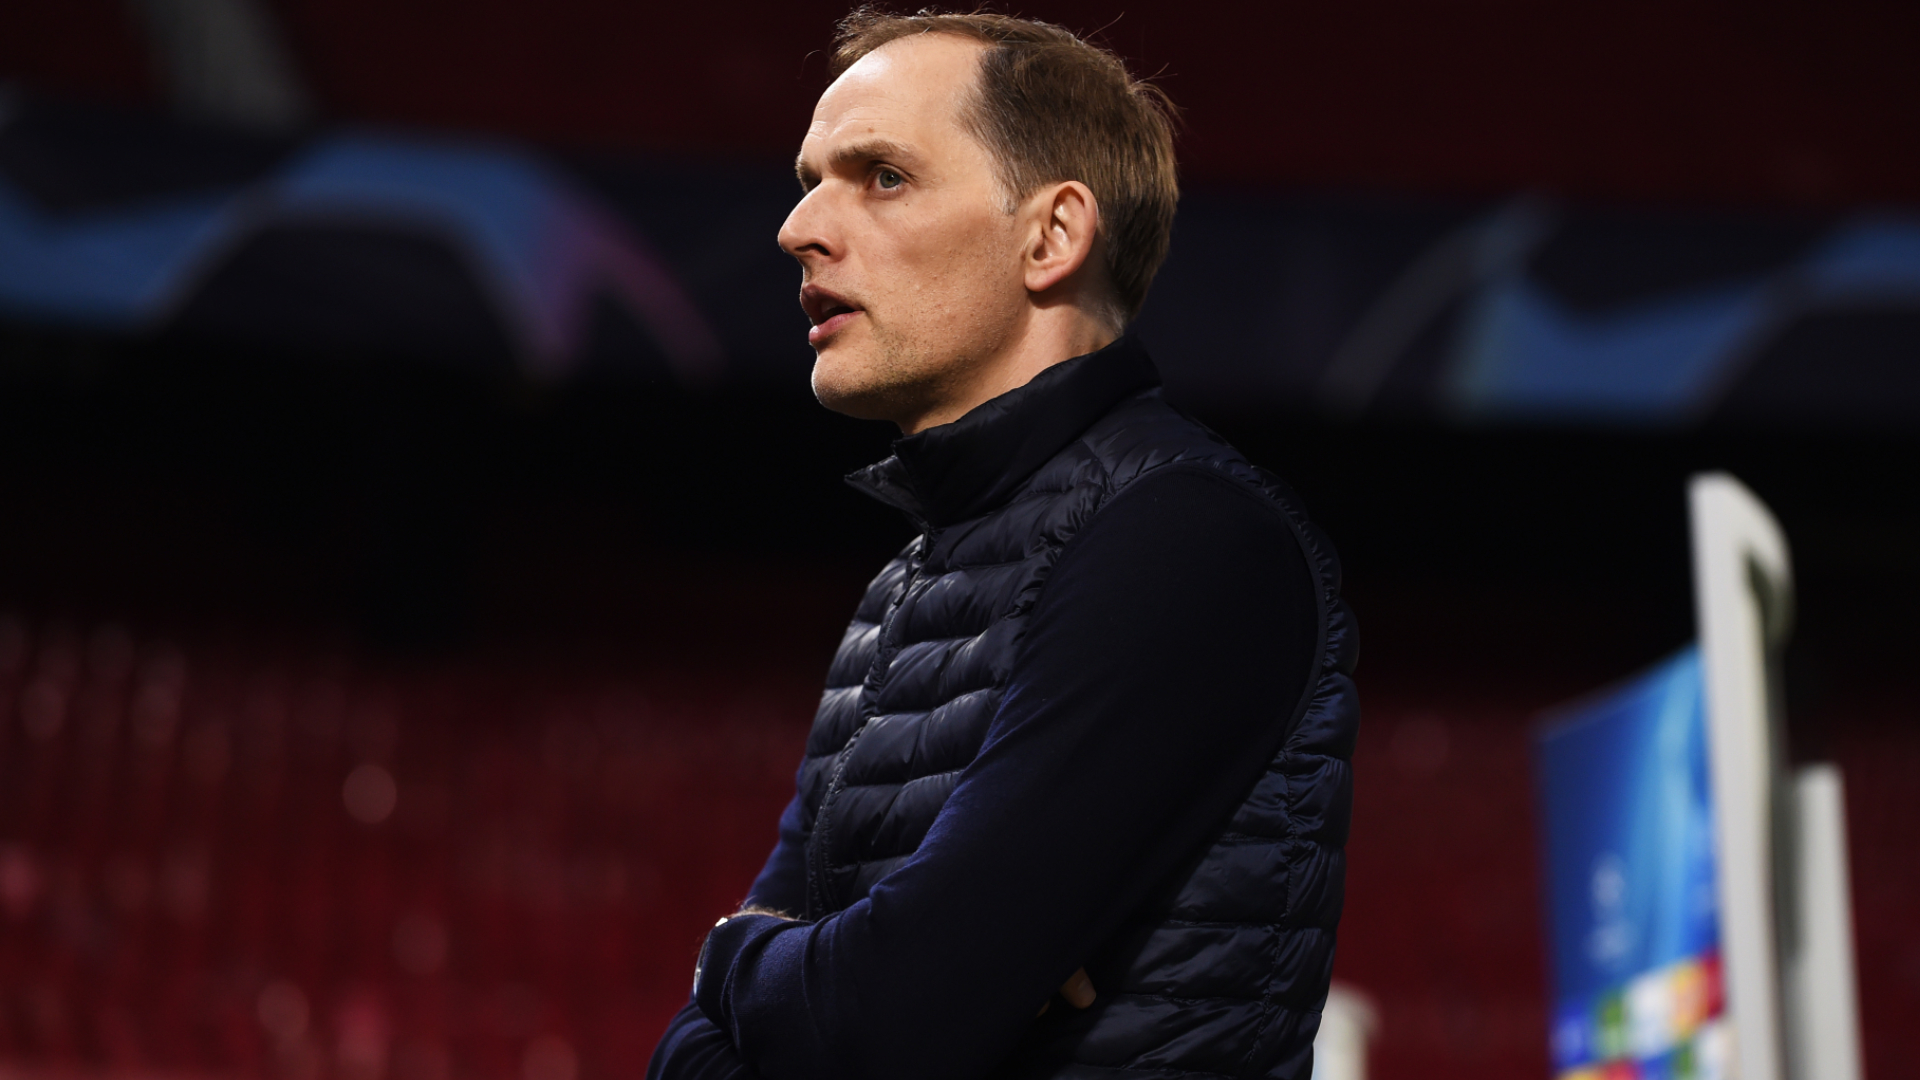 Chelsea are preparing for a significant week in their season, and Thomas Tuchel will not pretend trophies are not on his mind.